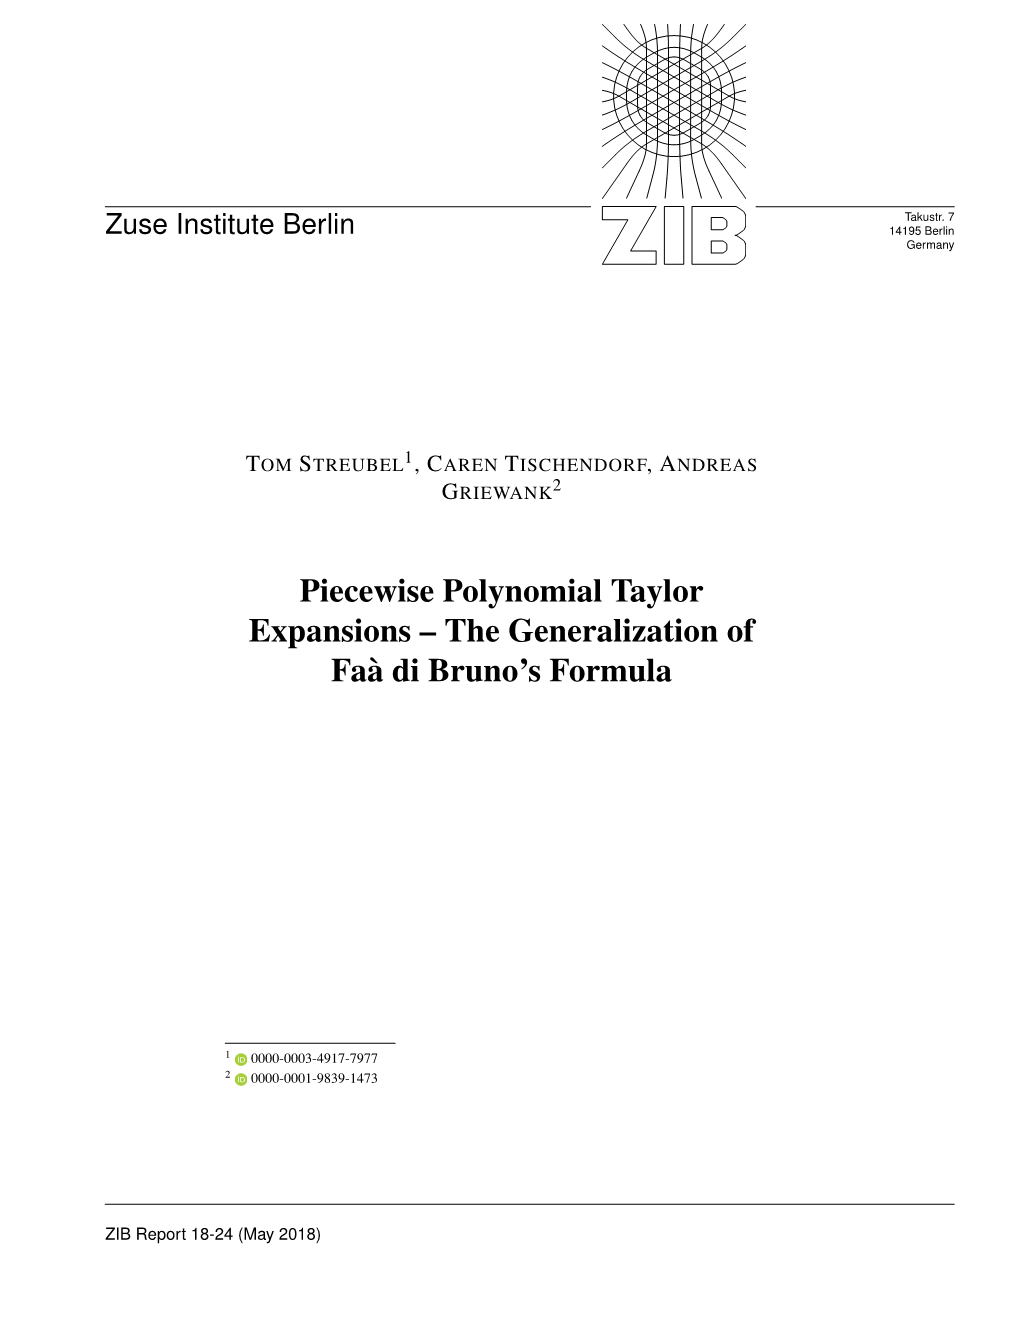 Piecewise Polynomial Taylor Expansions – the Generalization of Fa`A Di Bruno's Formula